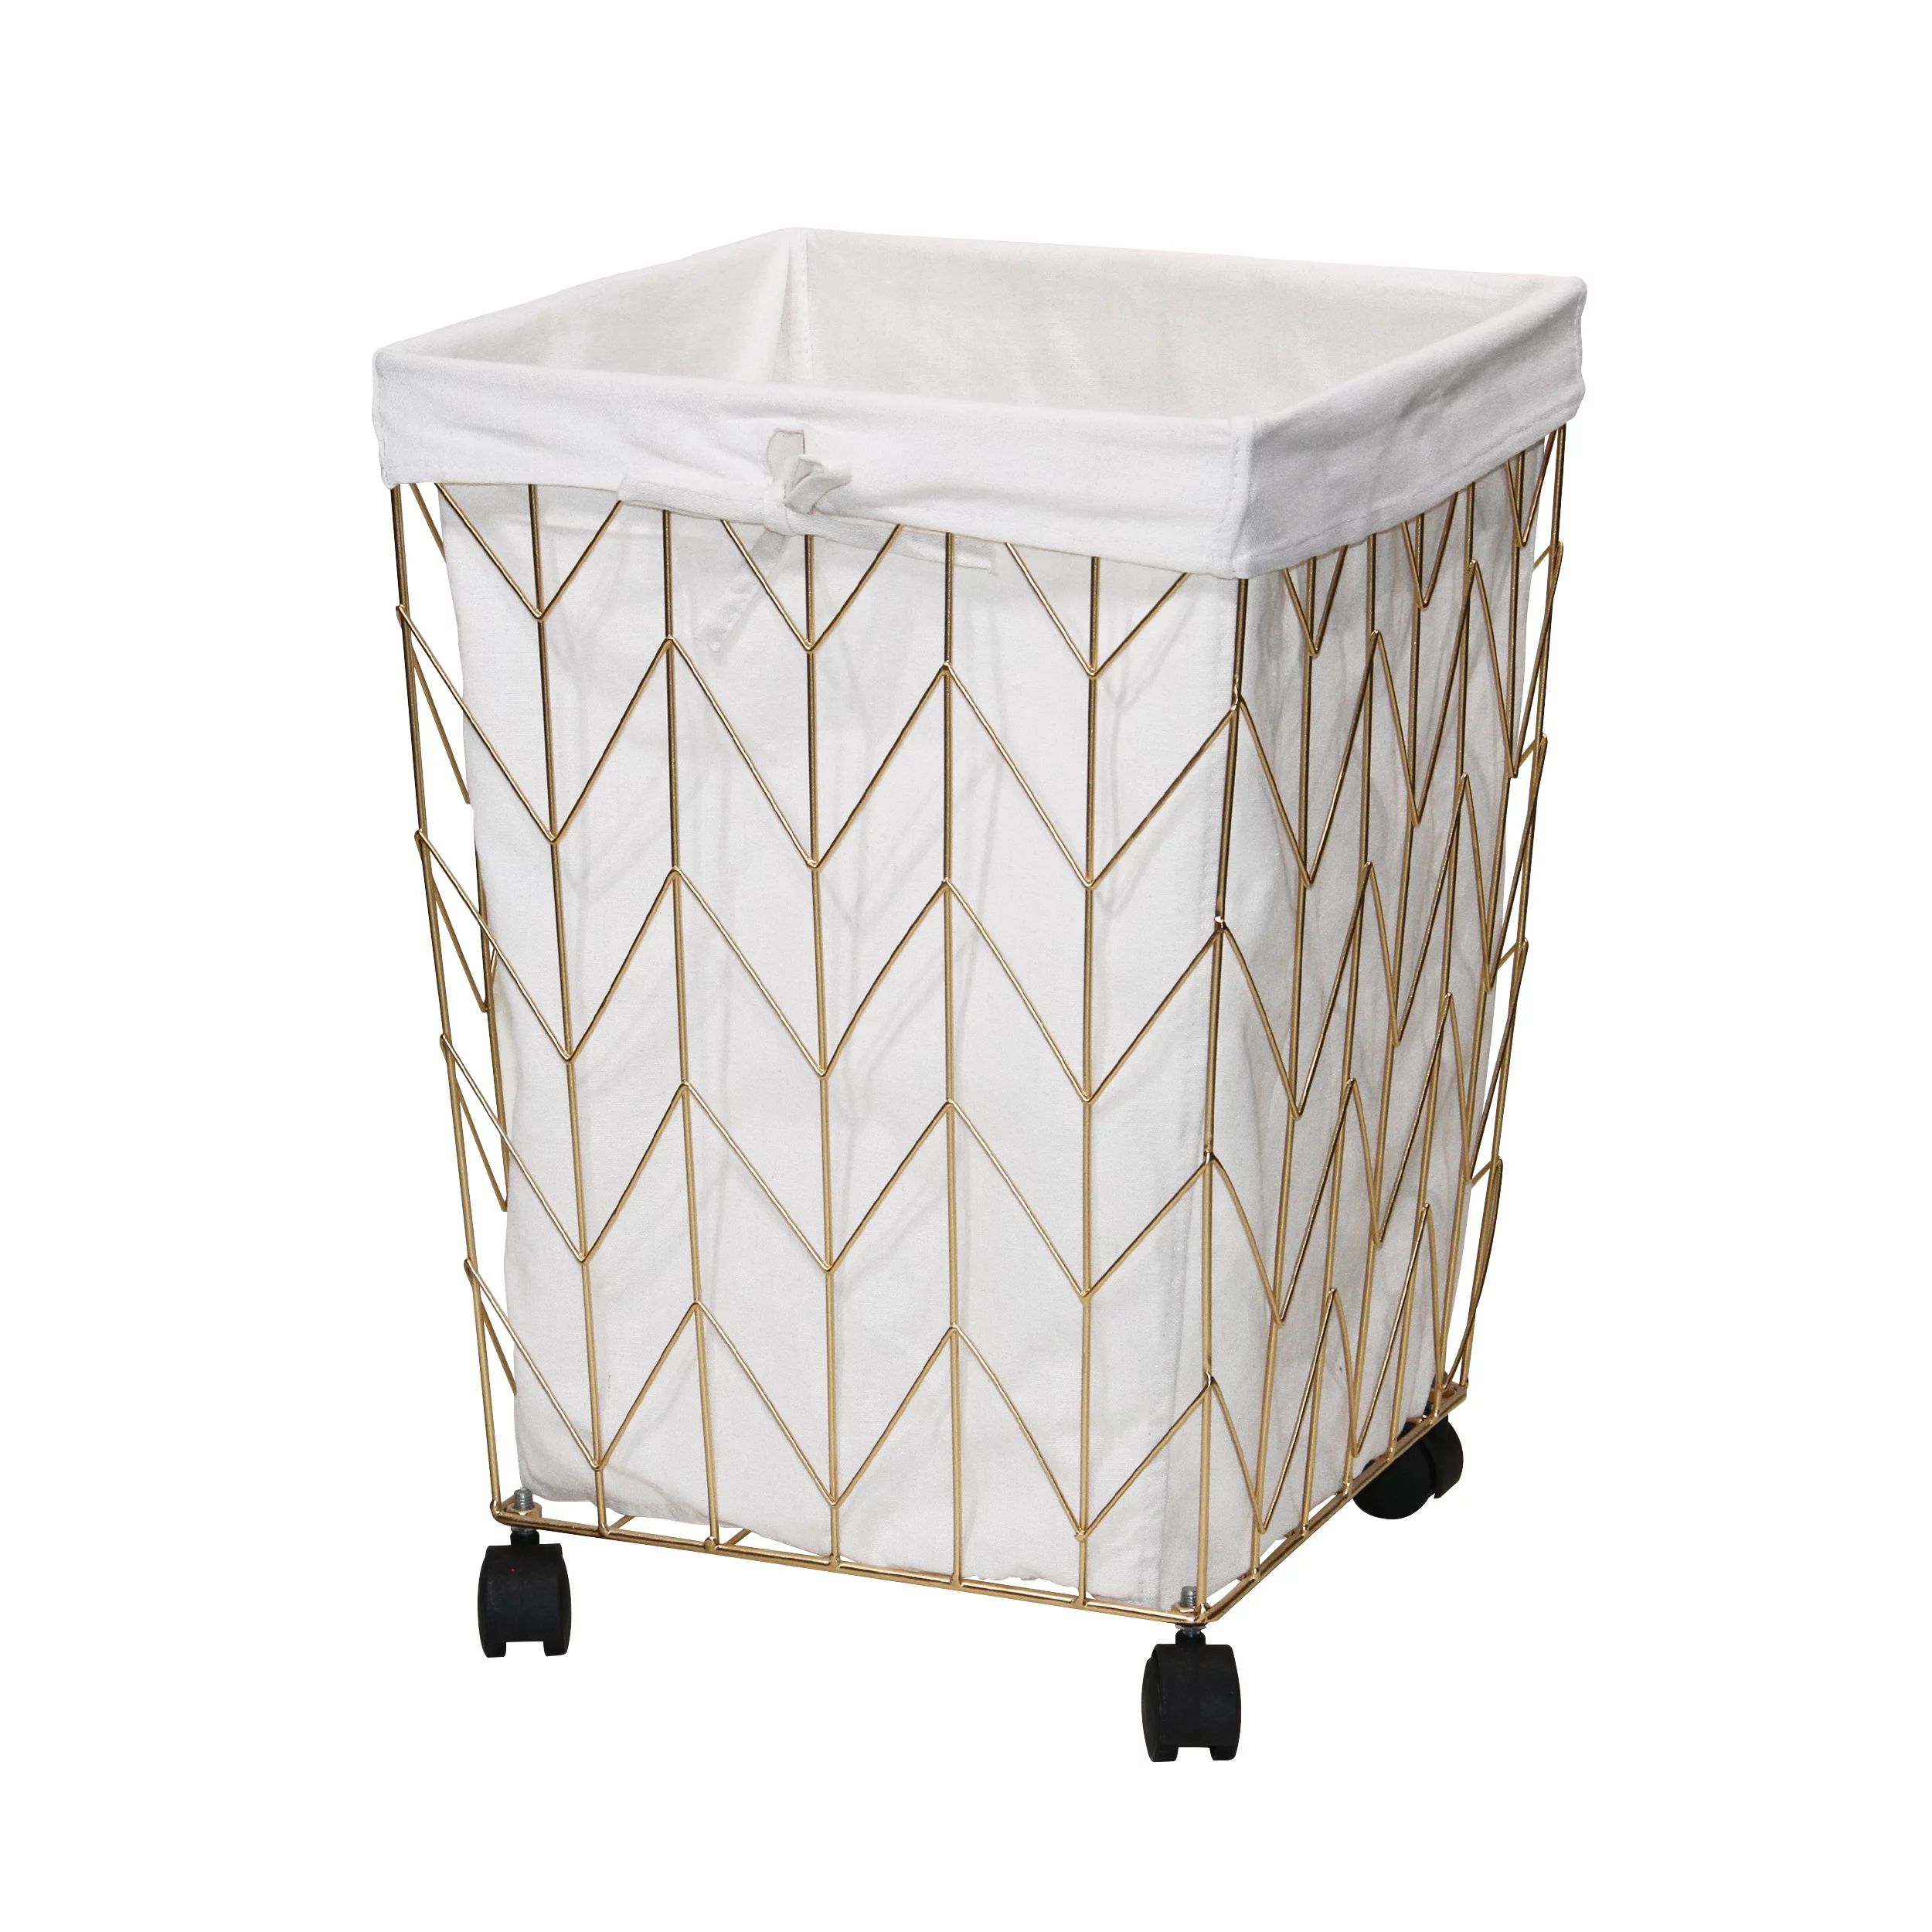 Mainstays Square Chevron Pattern Metal Laundry Hamper with Wheels, Gold & Natural | Walmart (US)